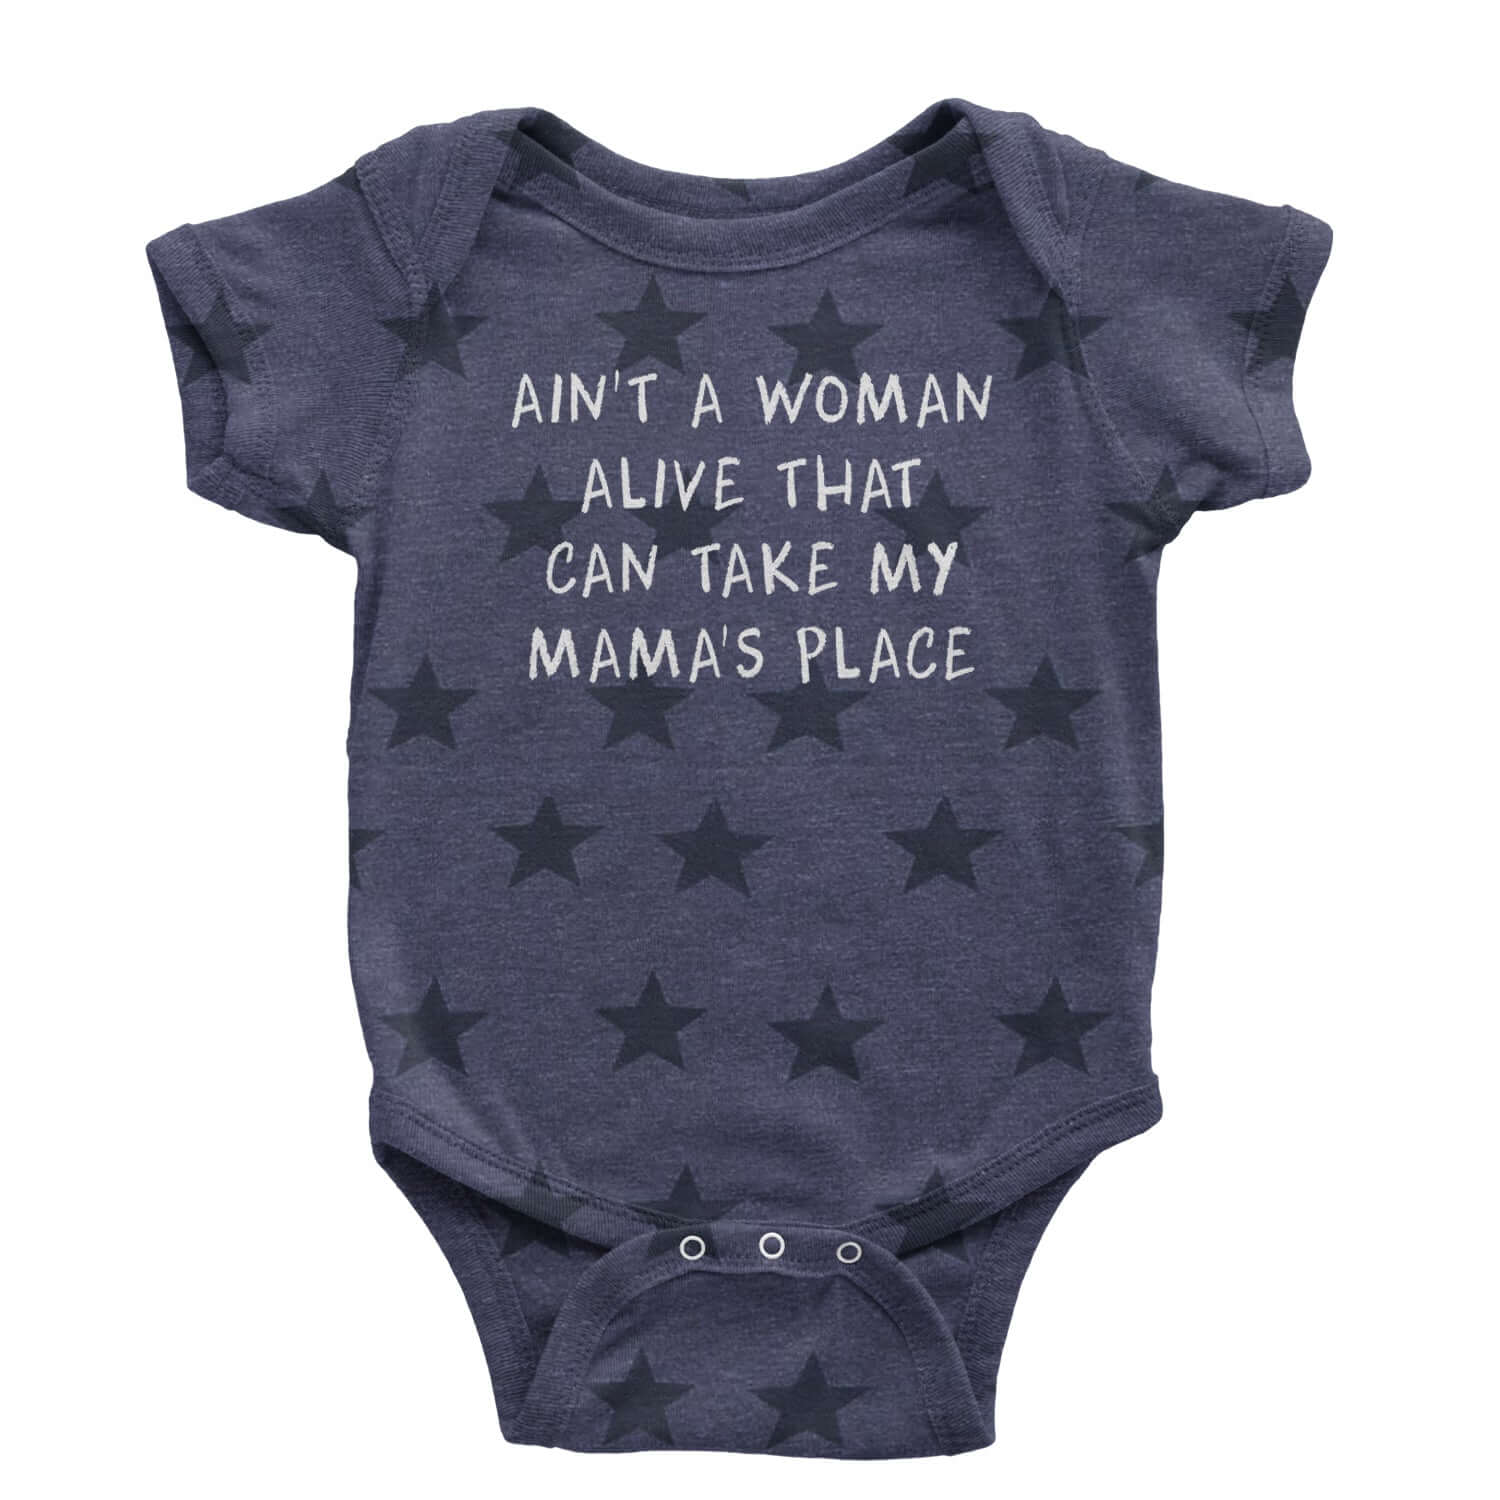 Ain't A Woman Alive That Can Take My Mama's Place Infant One-Piece Romper Bodysuit and Toddler T-shirt 2pac, bear, day, mama, mom, mothers, shakur, tupac by Expression Tees